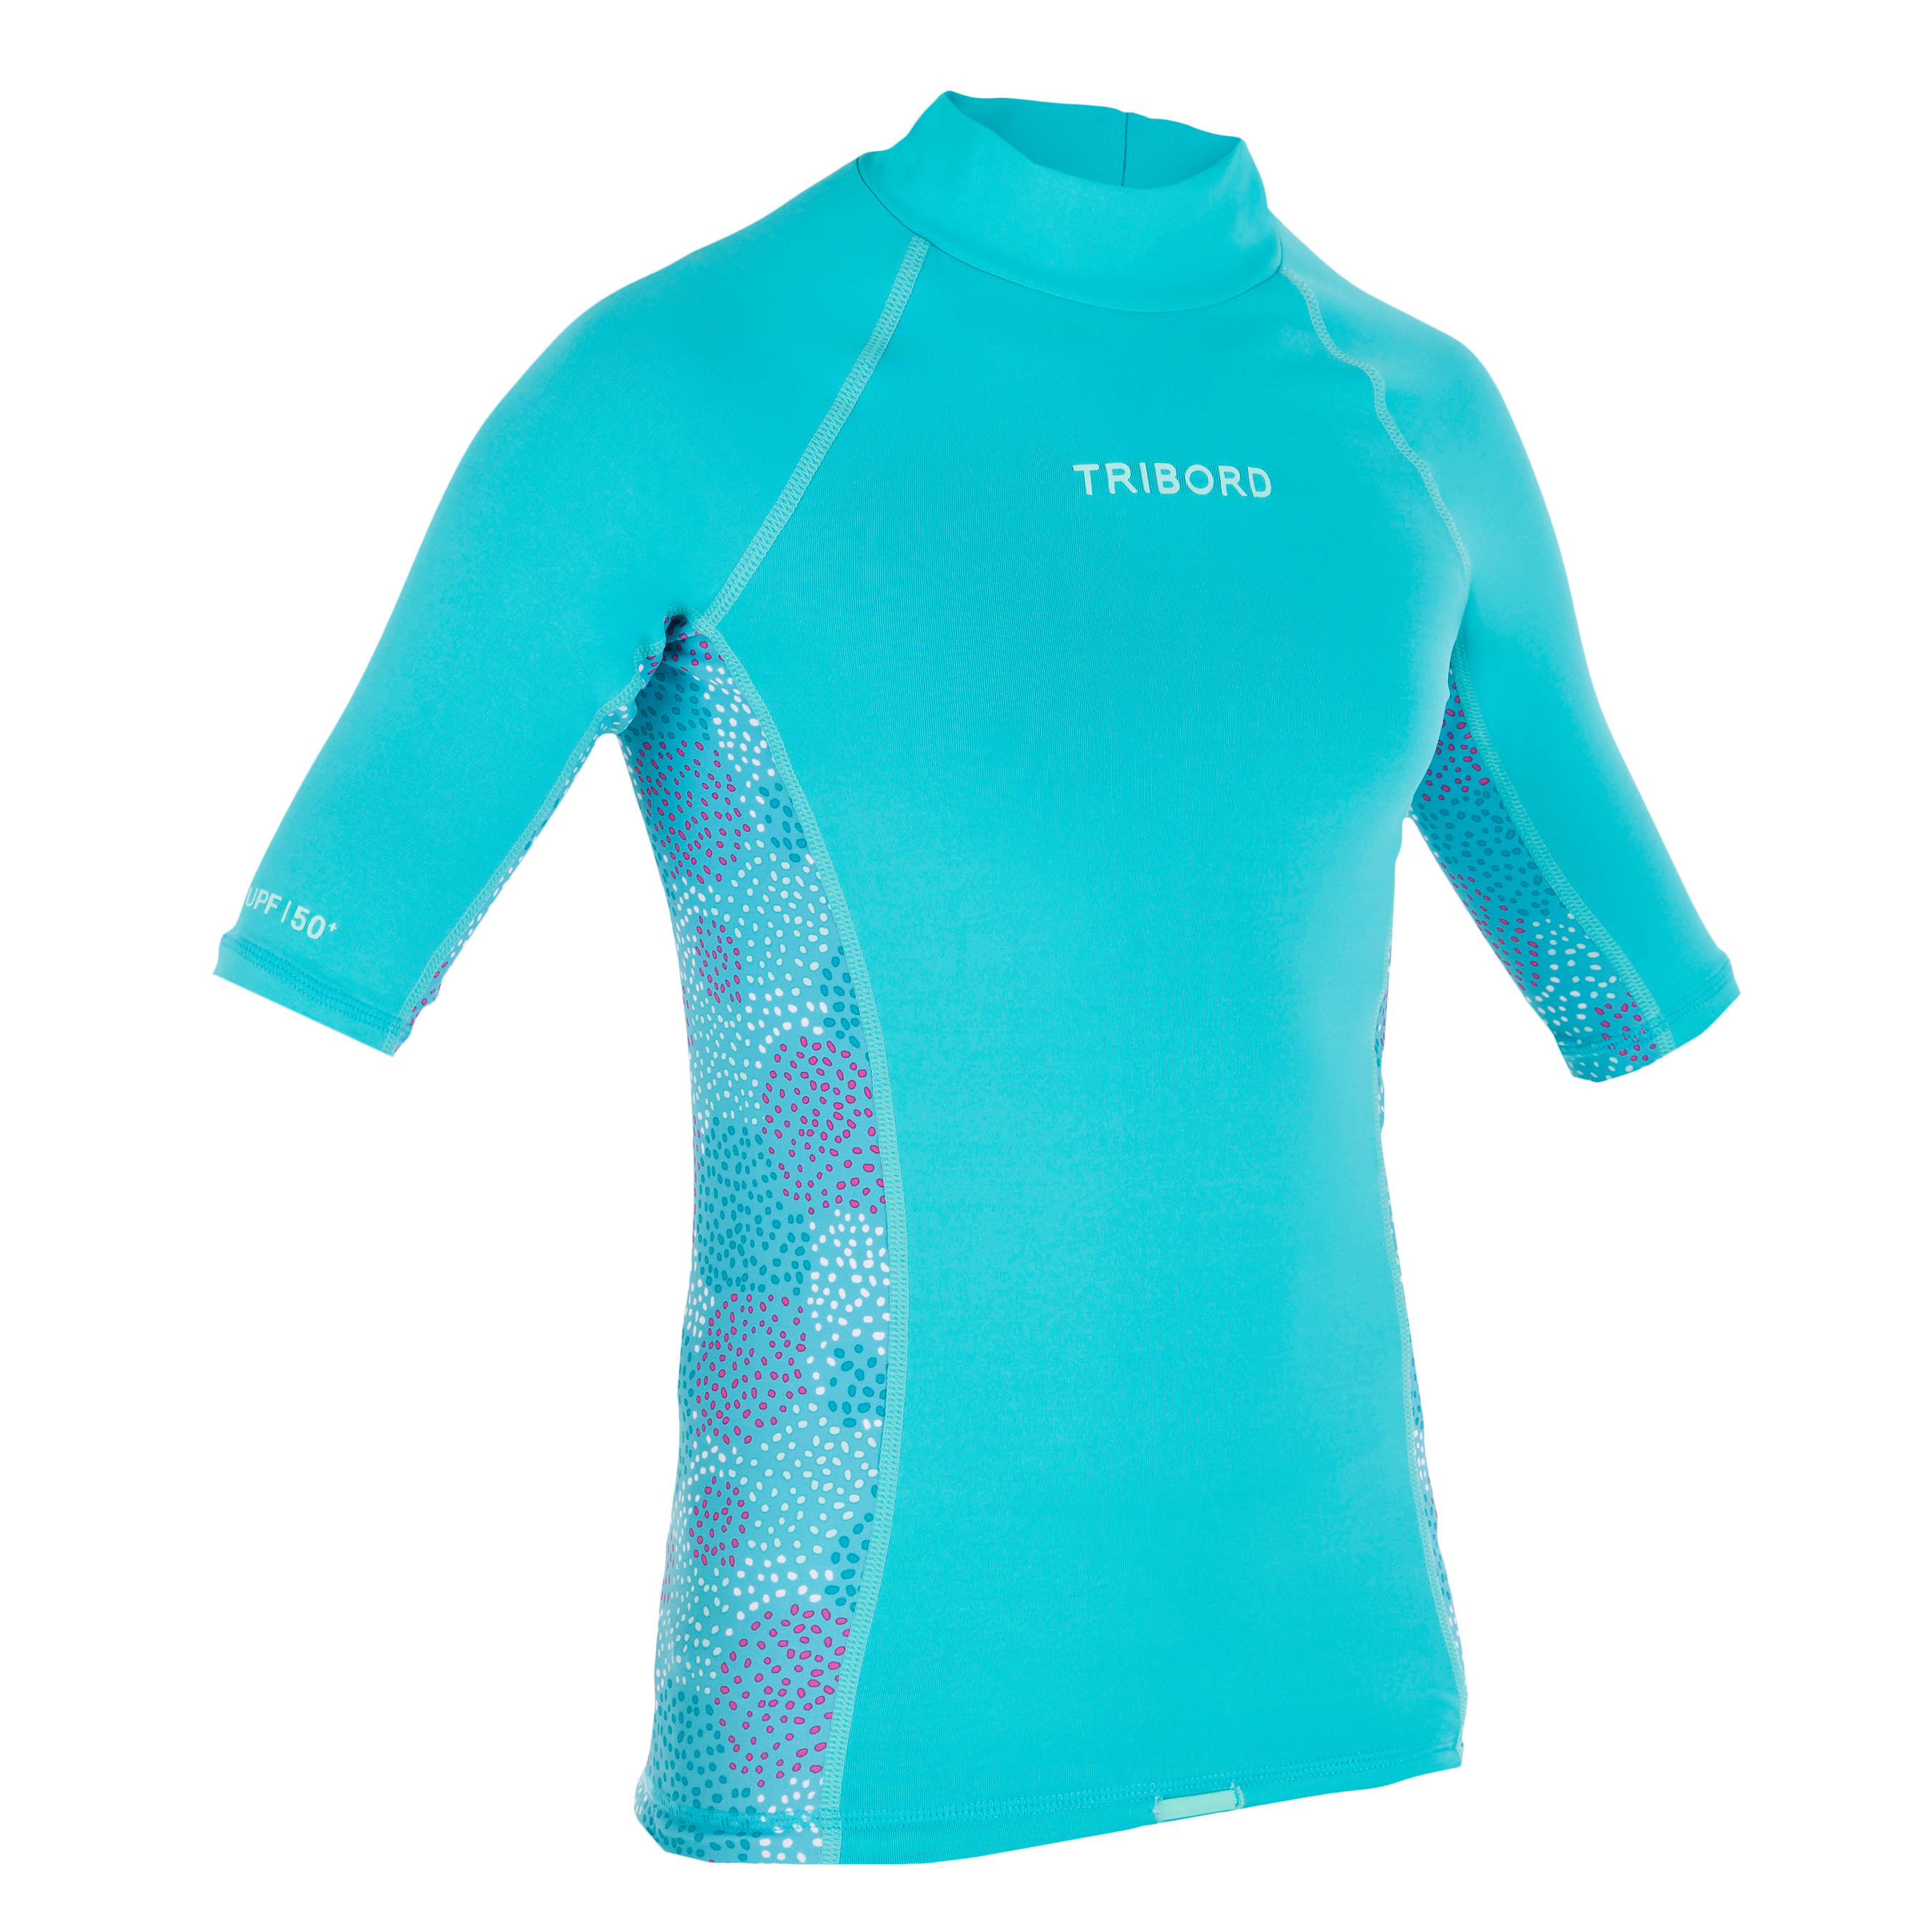 TRIBORD 500 Children's Short Sleeve UV Protection Surfing Top T-Shirt - Turquoise